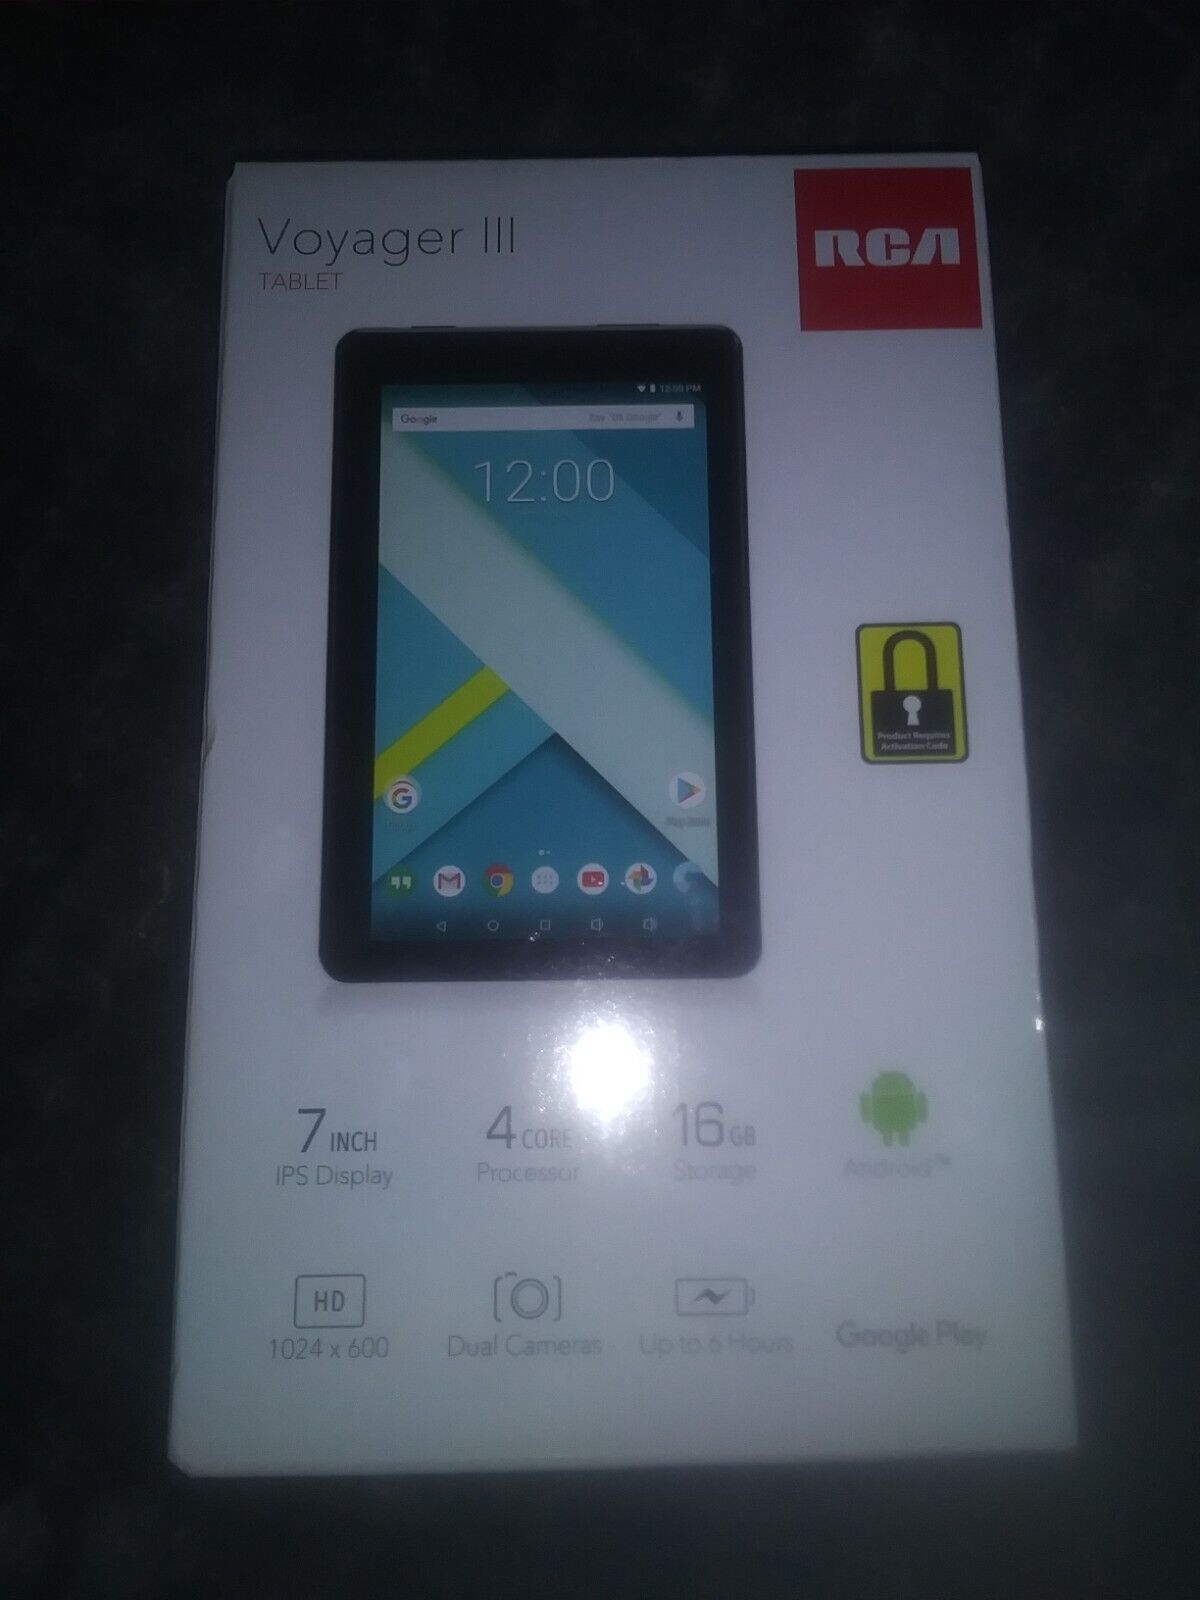 RCA VOYAGER 3 TABLET, new in box